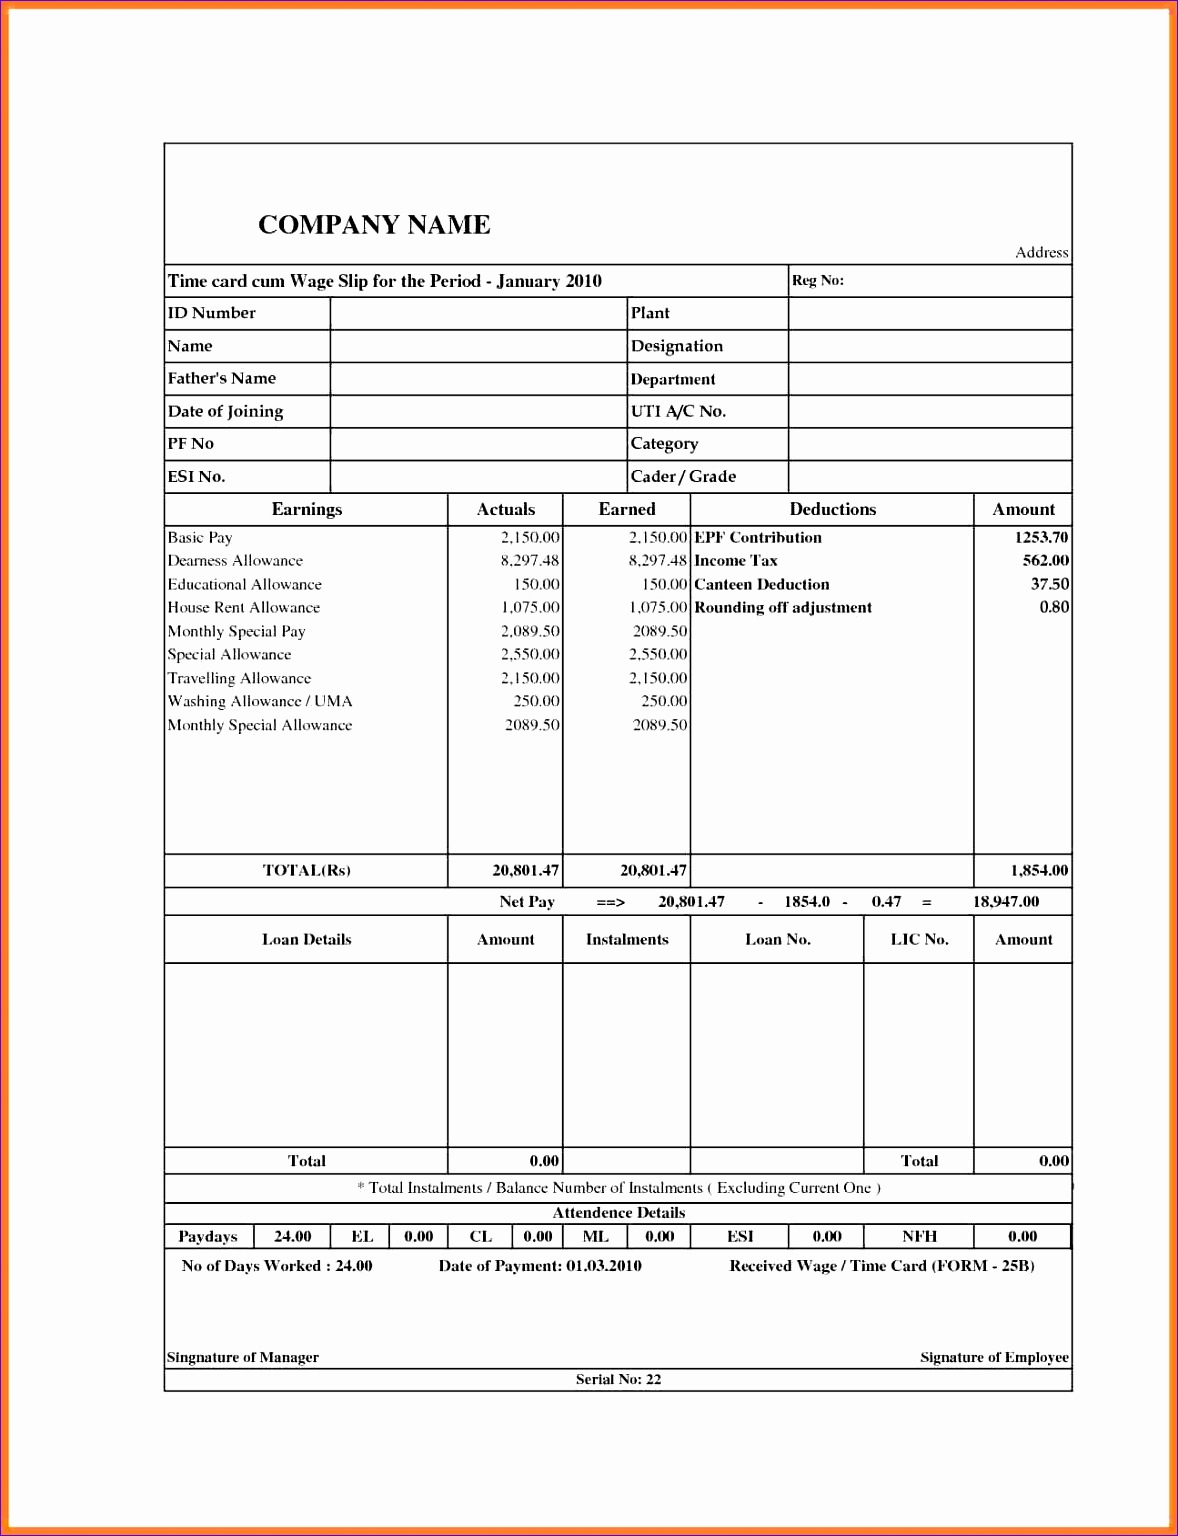 6 free online payslips template 11781536